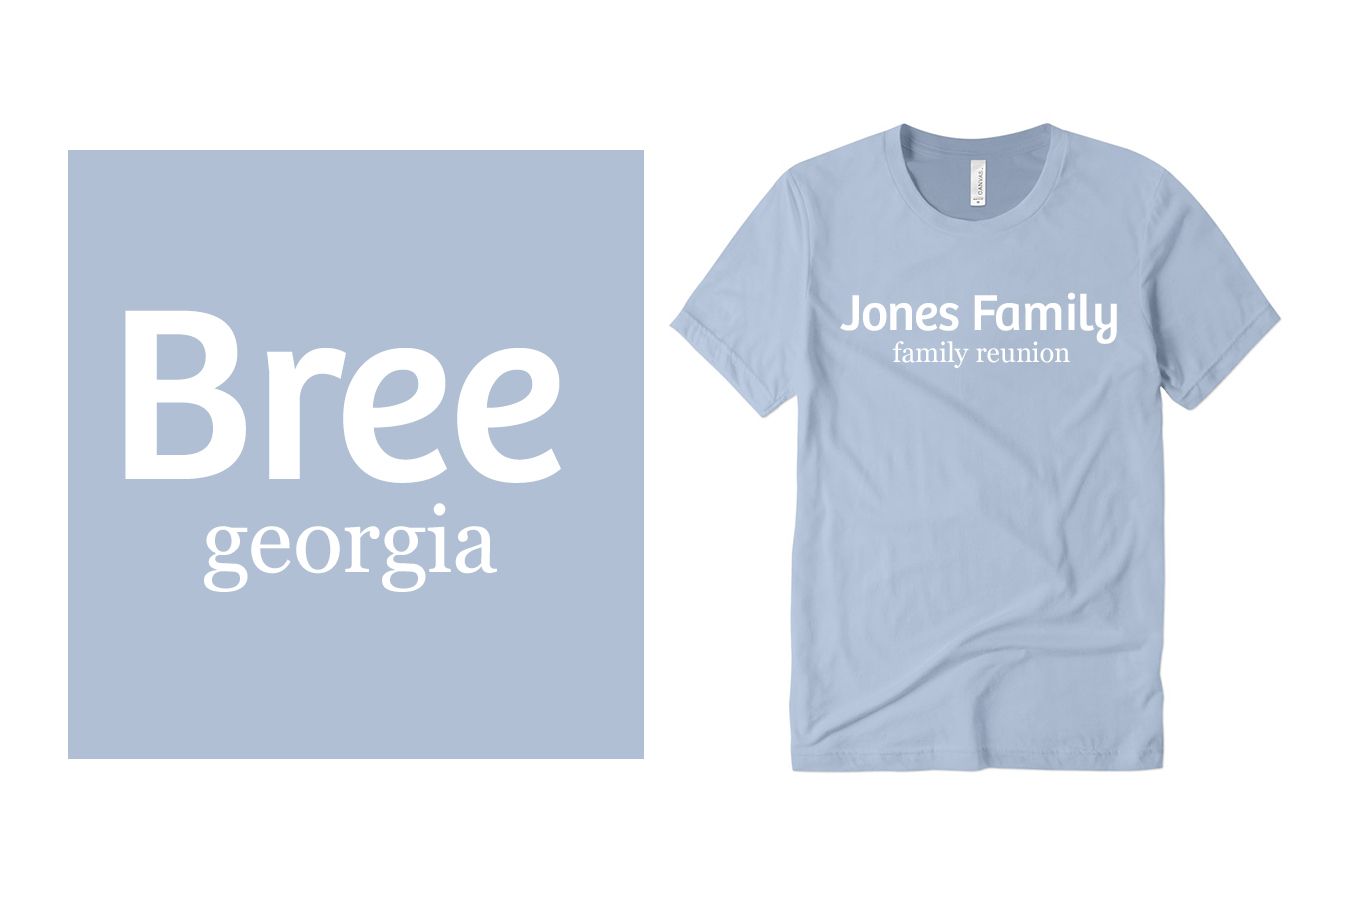 Example font pairing of Bree and Georgia.